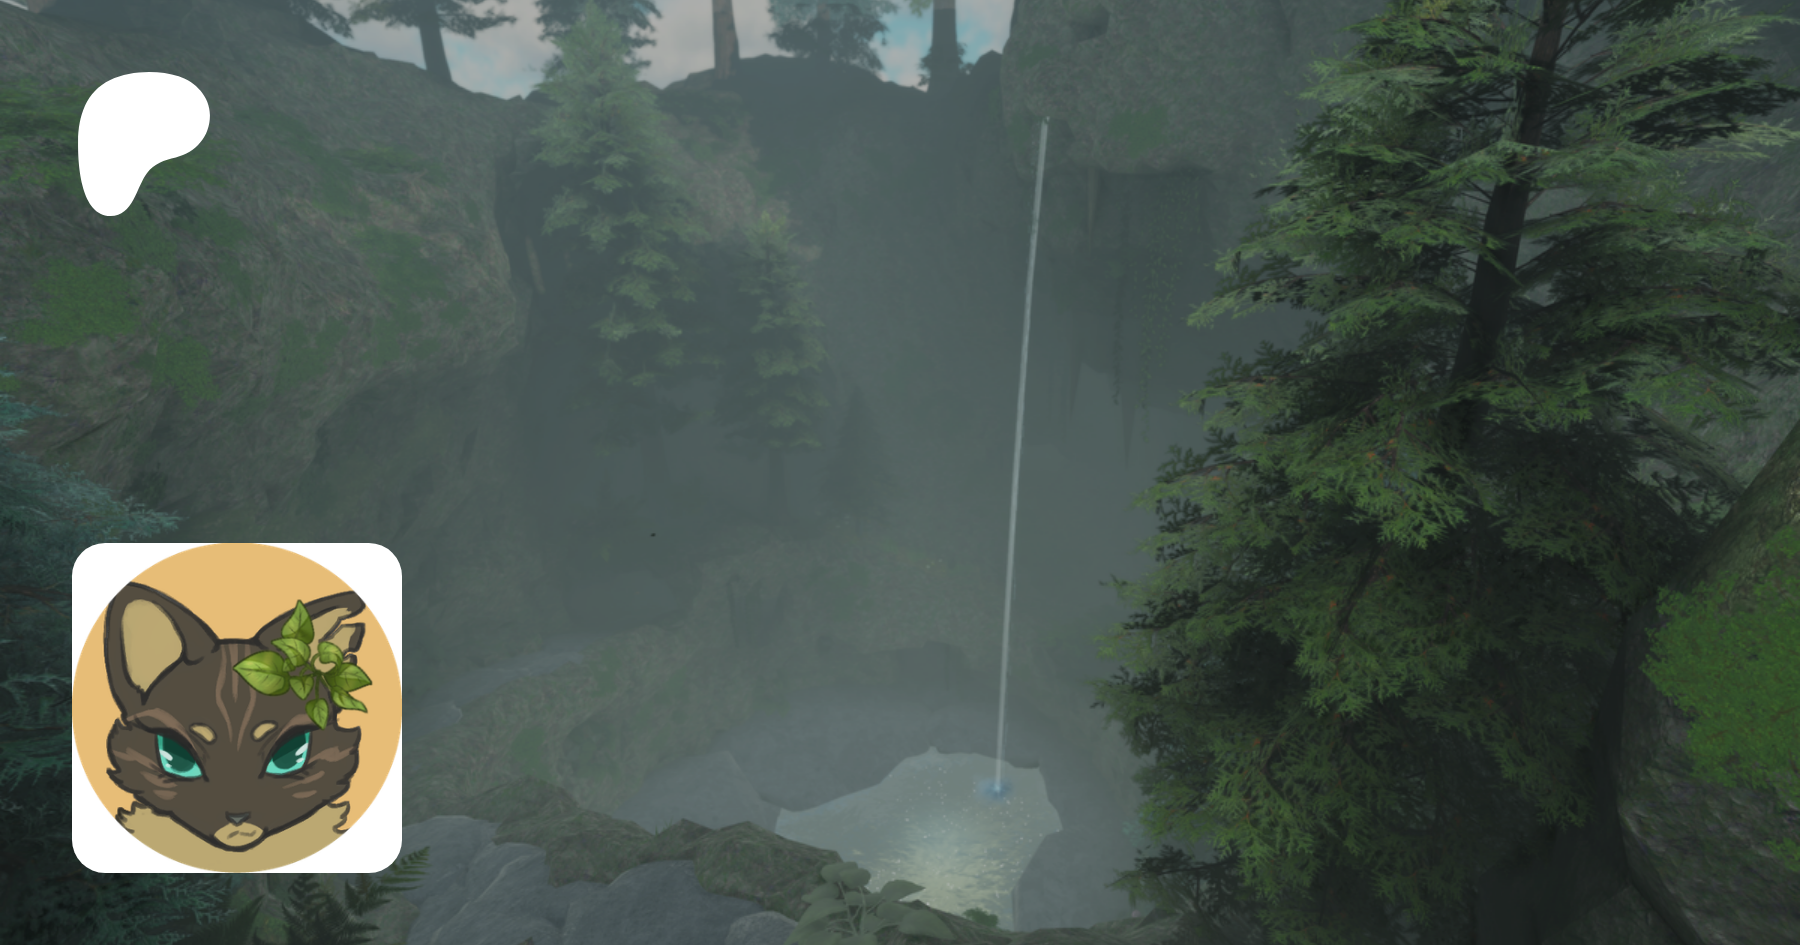 Petition · Bring back Warrior Cats: Forest Territory on Roblox